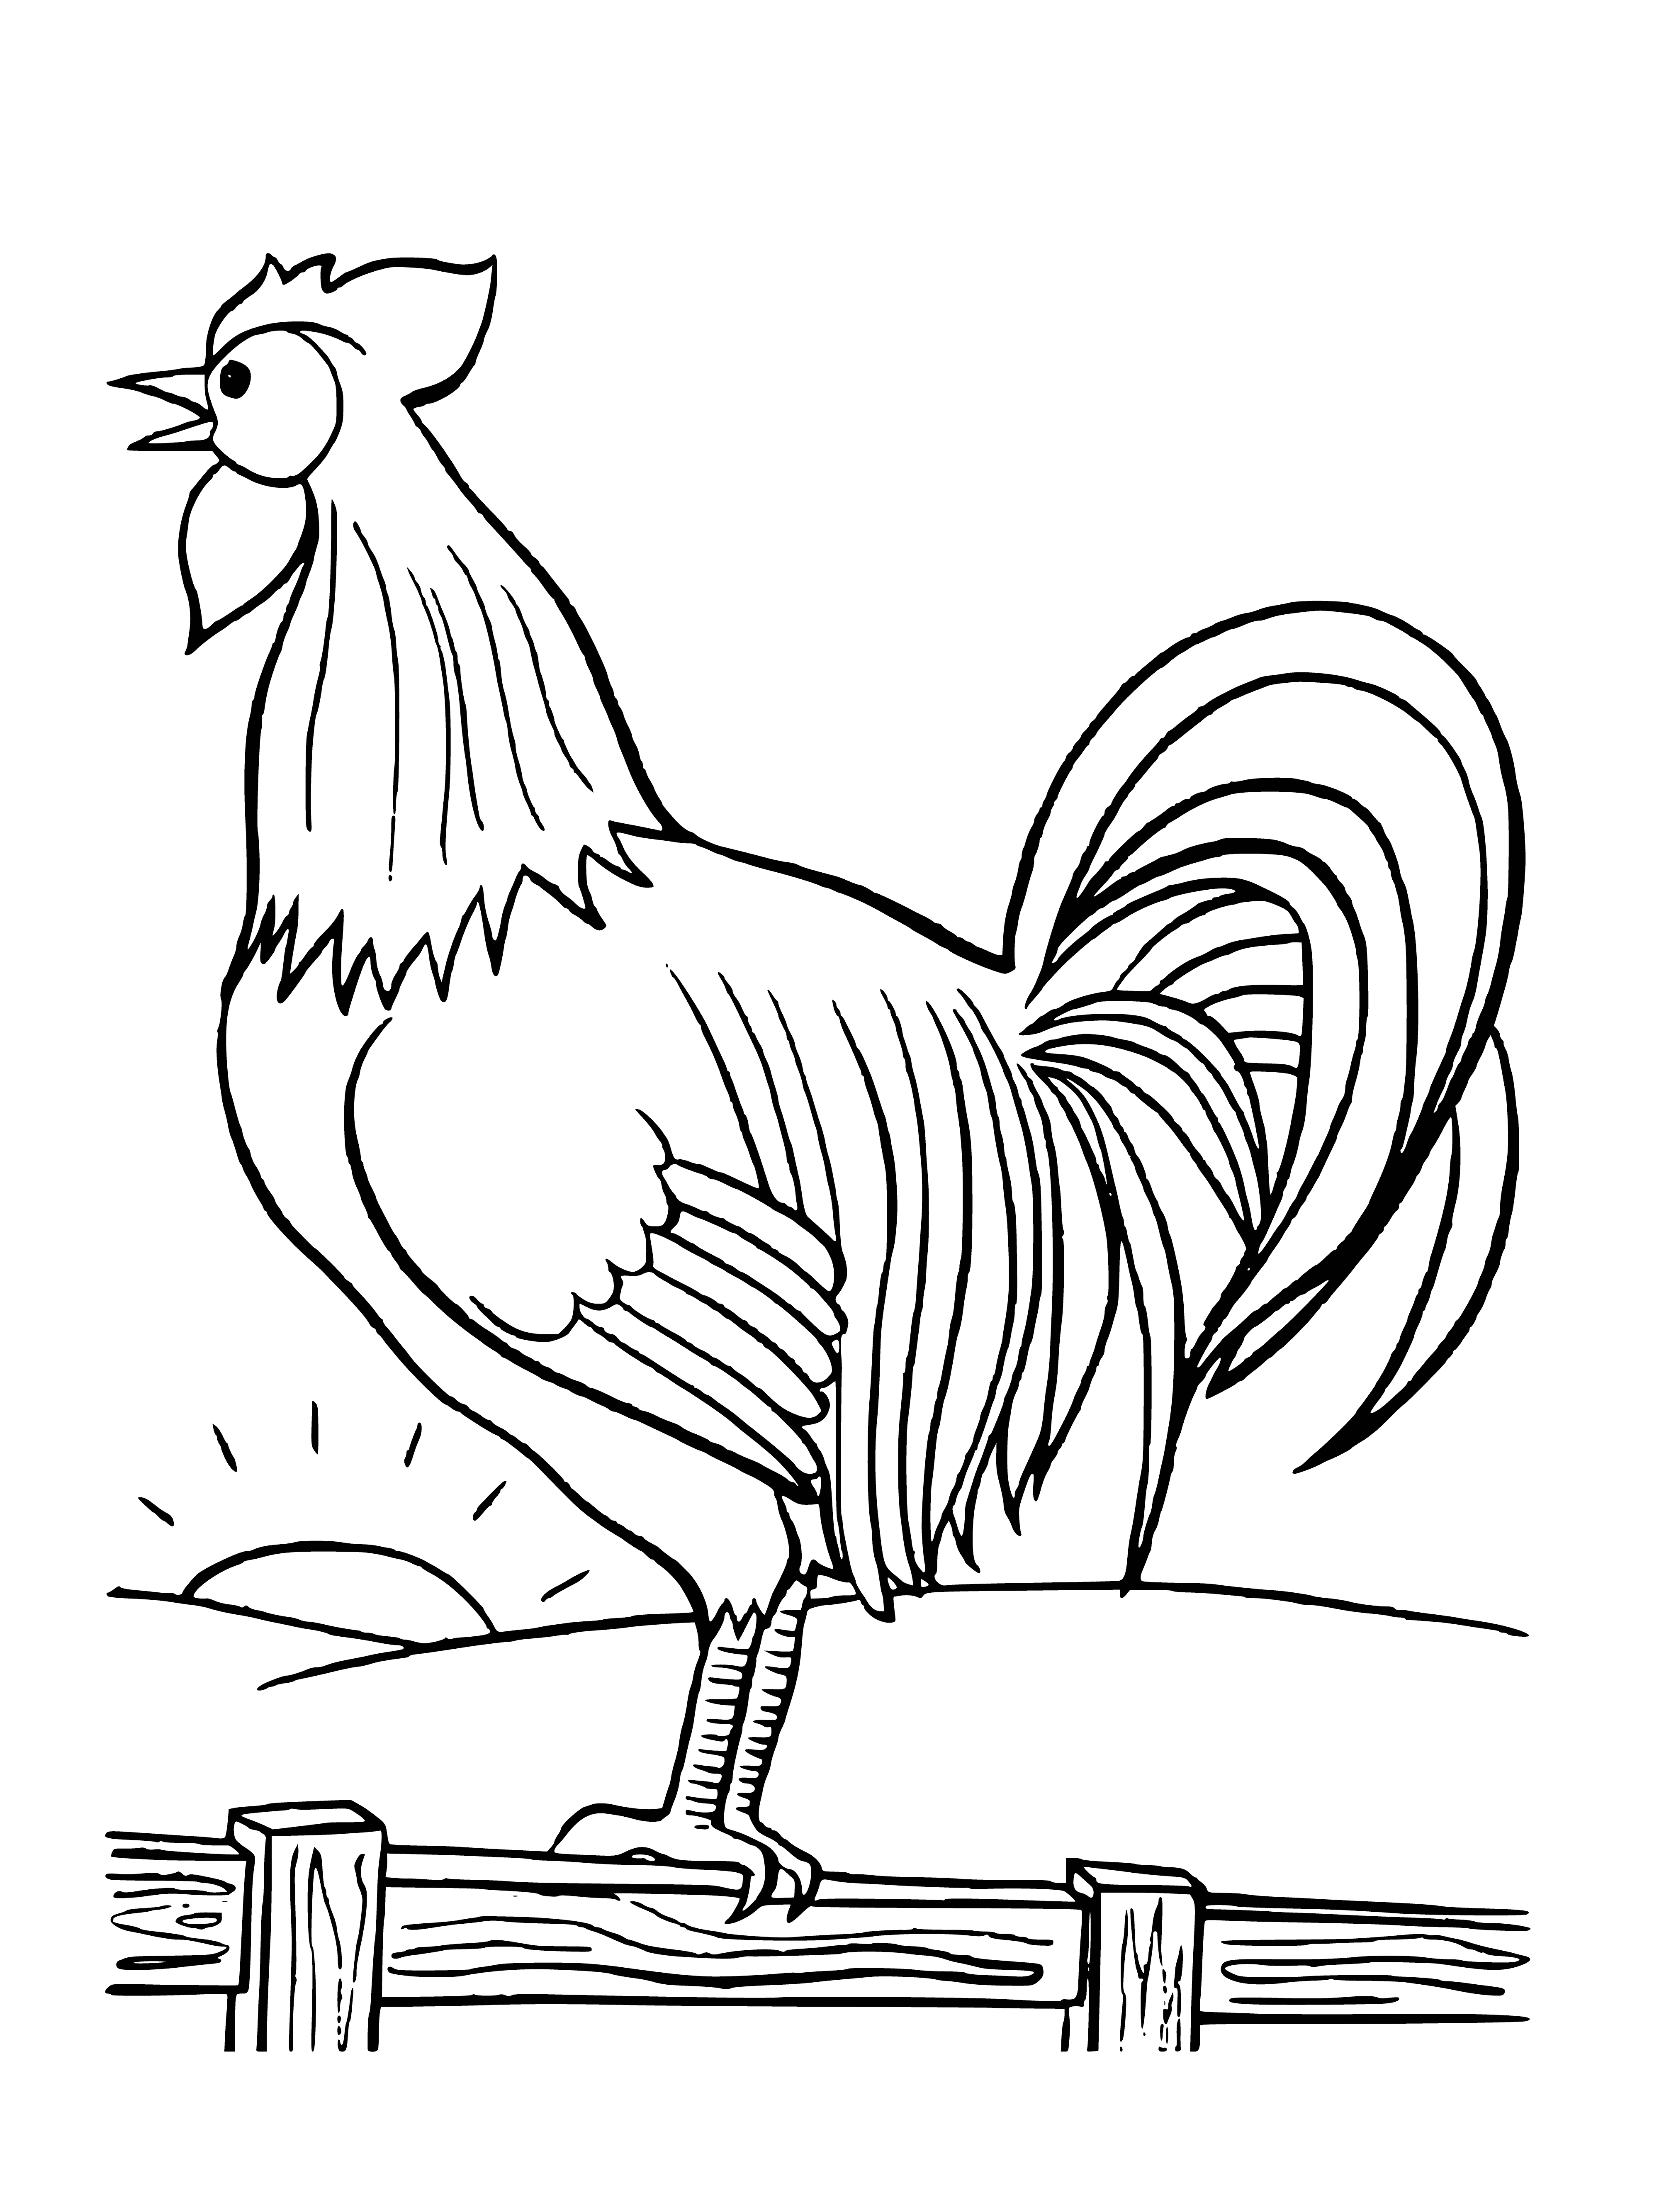 Rooster at sunrise coloring page